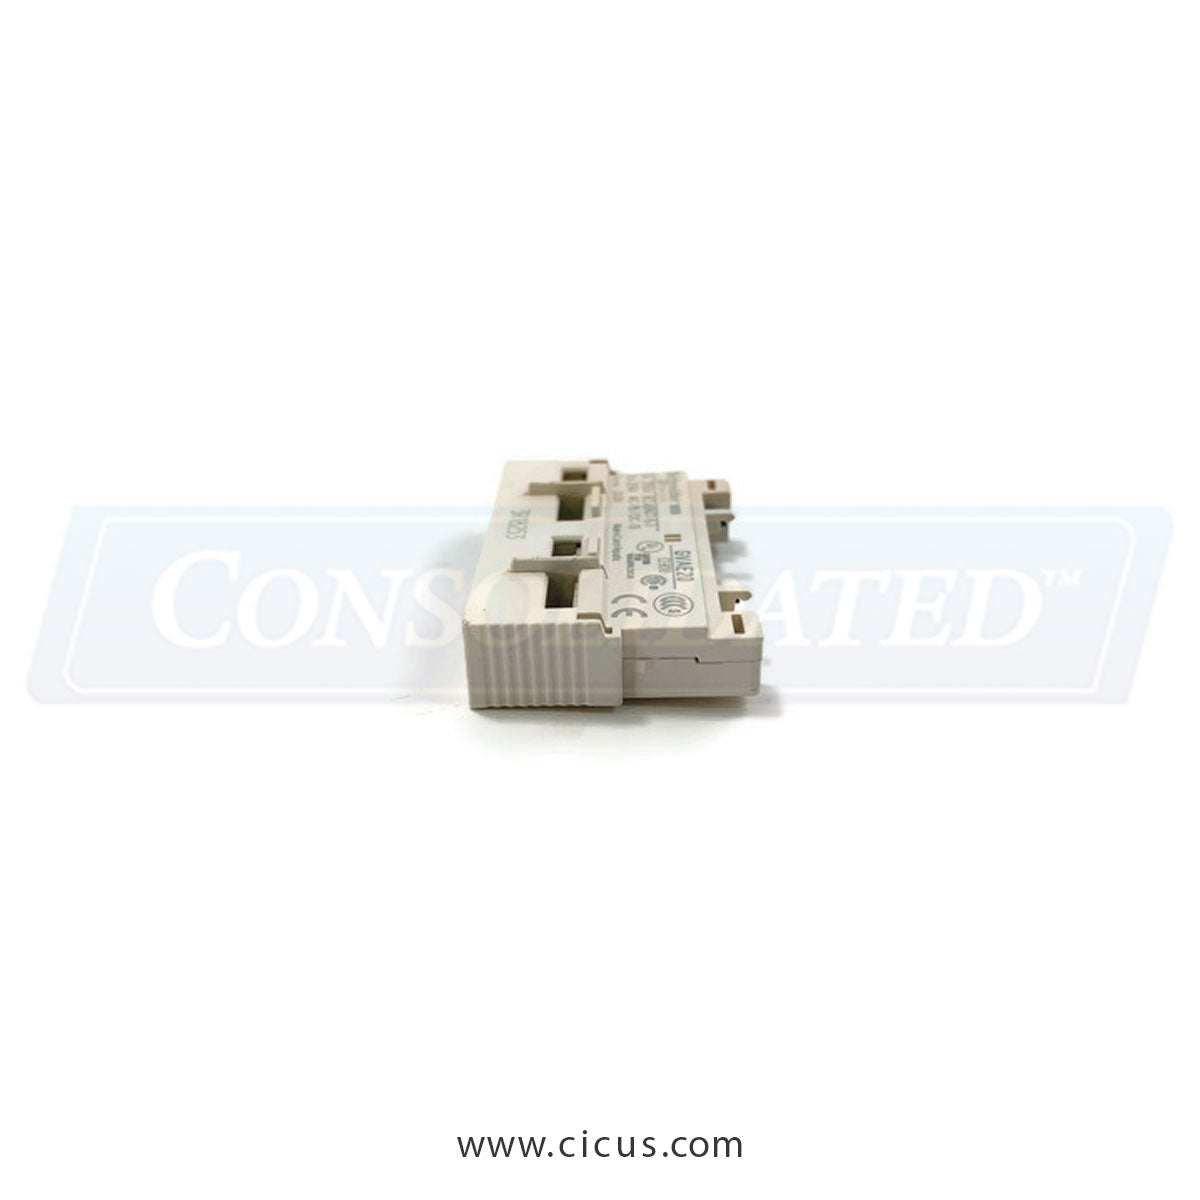 Chicago Aux Contactor for Motor Protector [1414-680]